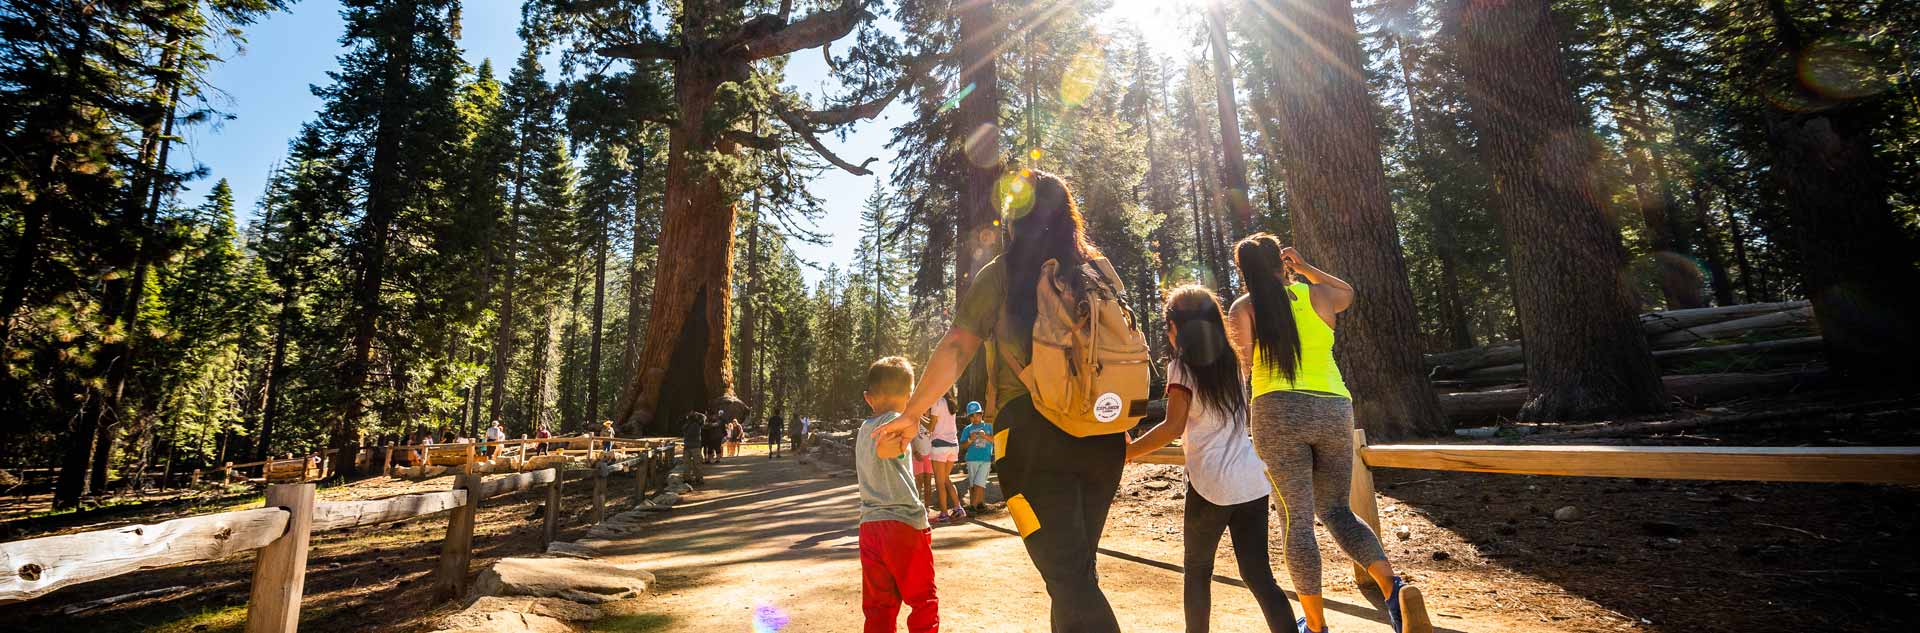 A family exploring the Mariposa Grove of Giant Sequoias in Yosemite